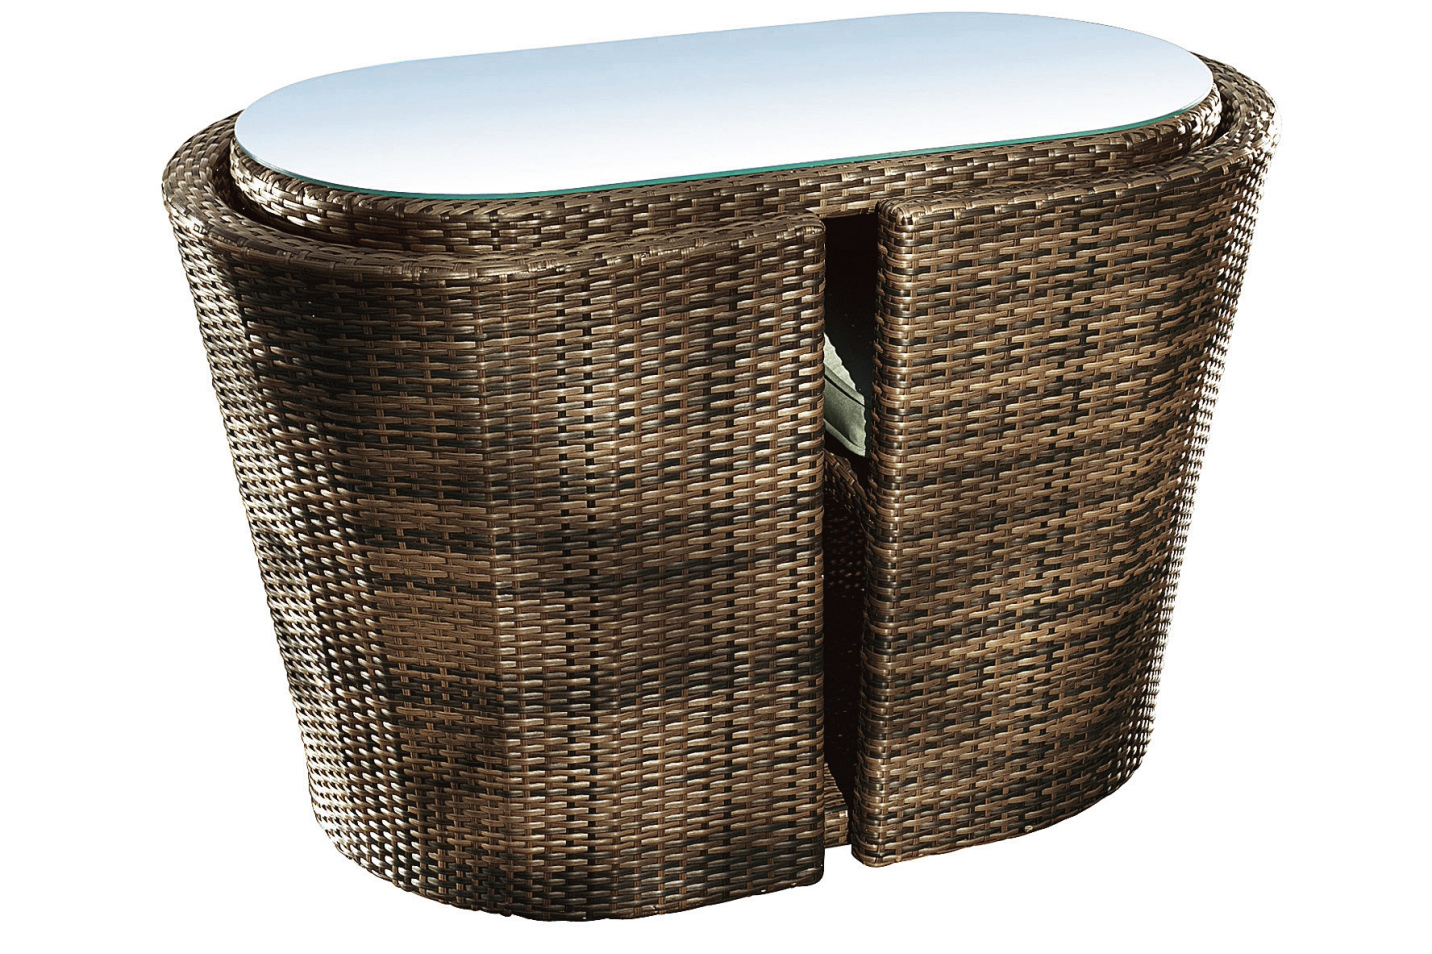 New balcony natural garden patio outdoor wicker rattan table and chairs